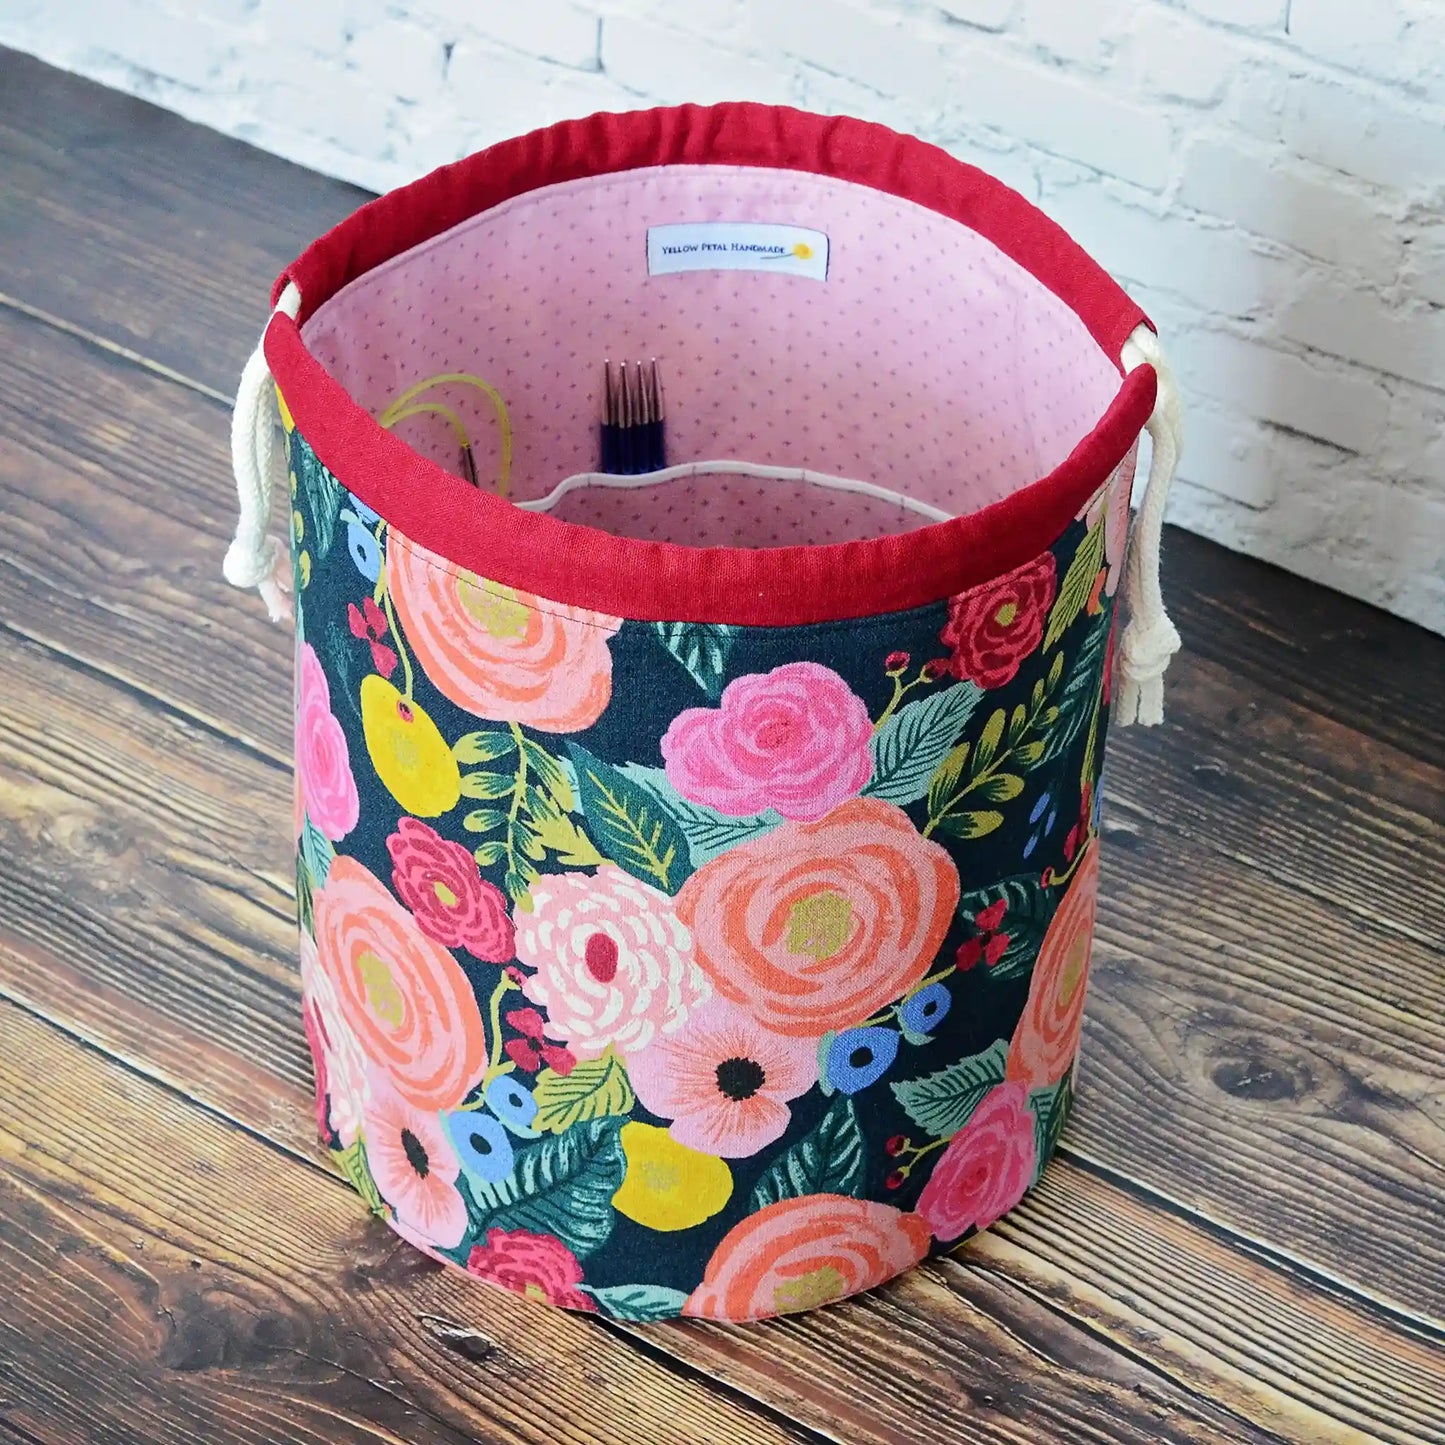 Stunning floral project bag in English Garden canvas by Rifle Paper Co.  Lined in a mauve cotton.  Made in Nova Scotia, Canada by Yellow Petal Handmade.